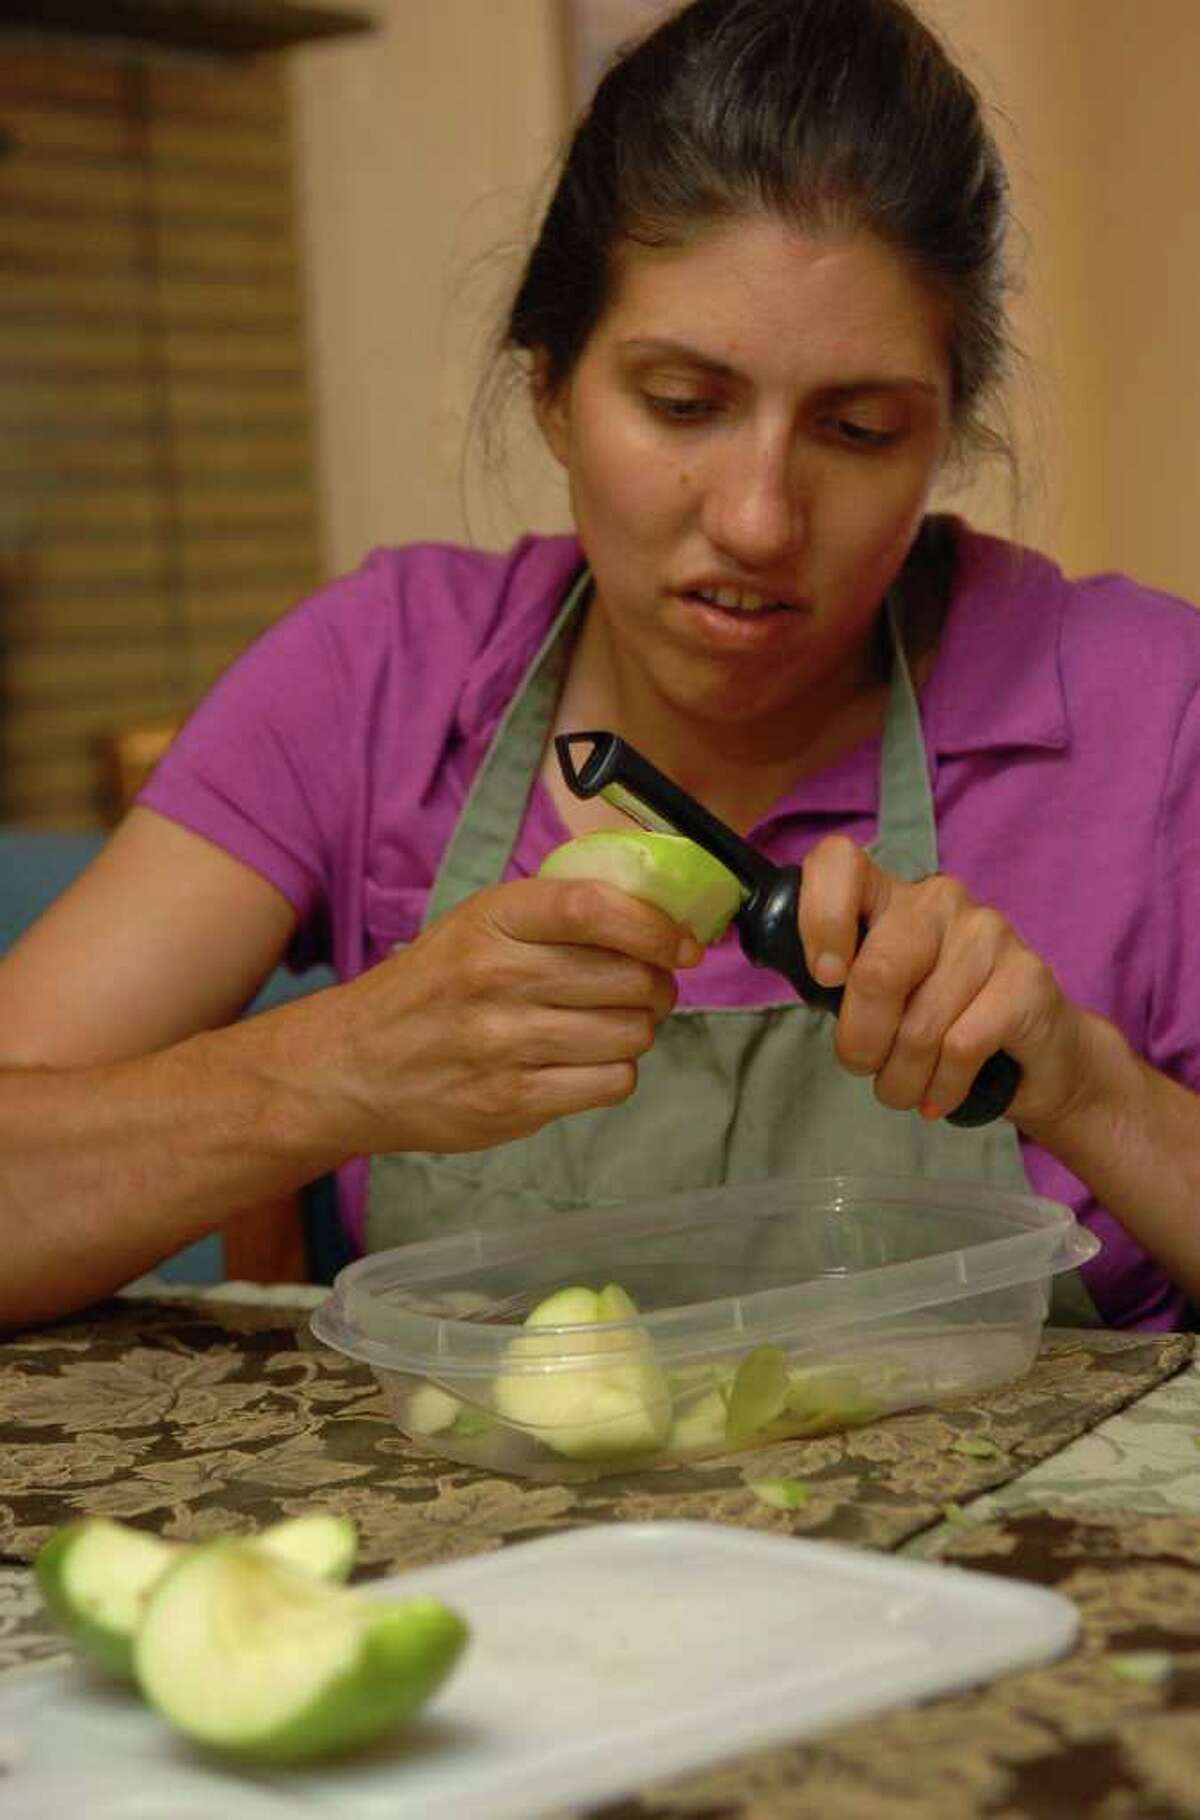 Brita Darany von Regensburg is the founder of Friends of Autistic People, a Greenwich based nonprofit organization that is working to create opportunities for adults with autism. Brita's daughter Vanessa Darany, who has autism, lives at a group home in Trumbull and would benefit from the organization. Here, she peels some apples for an apple pie while at the home in Trumbull, Conn. on Friday August 13, 2010.